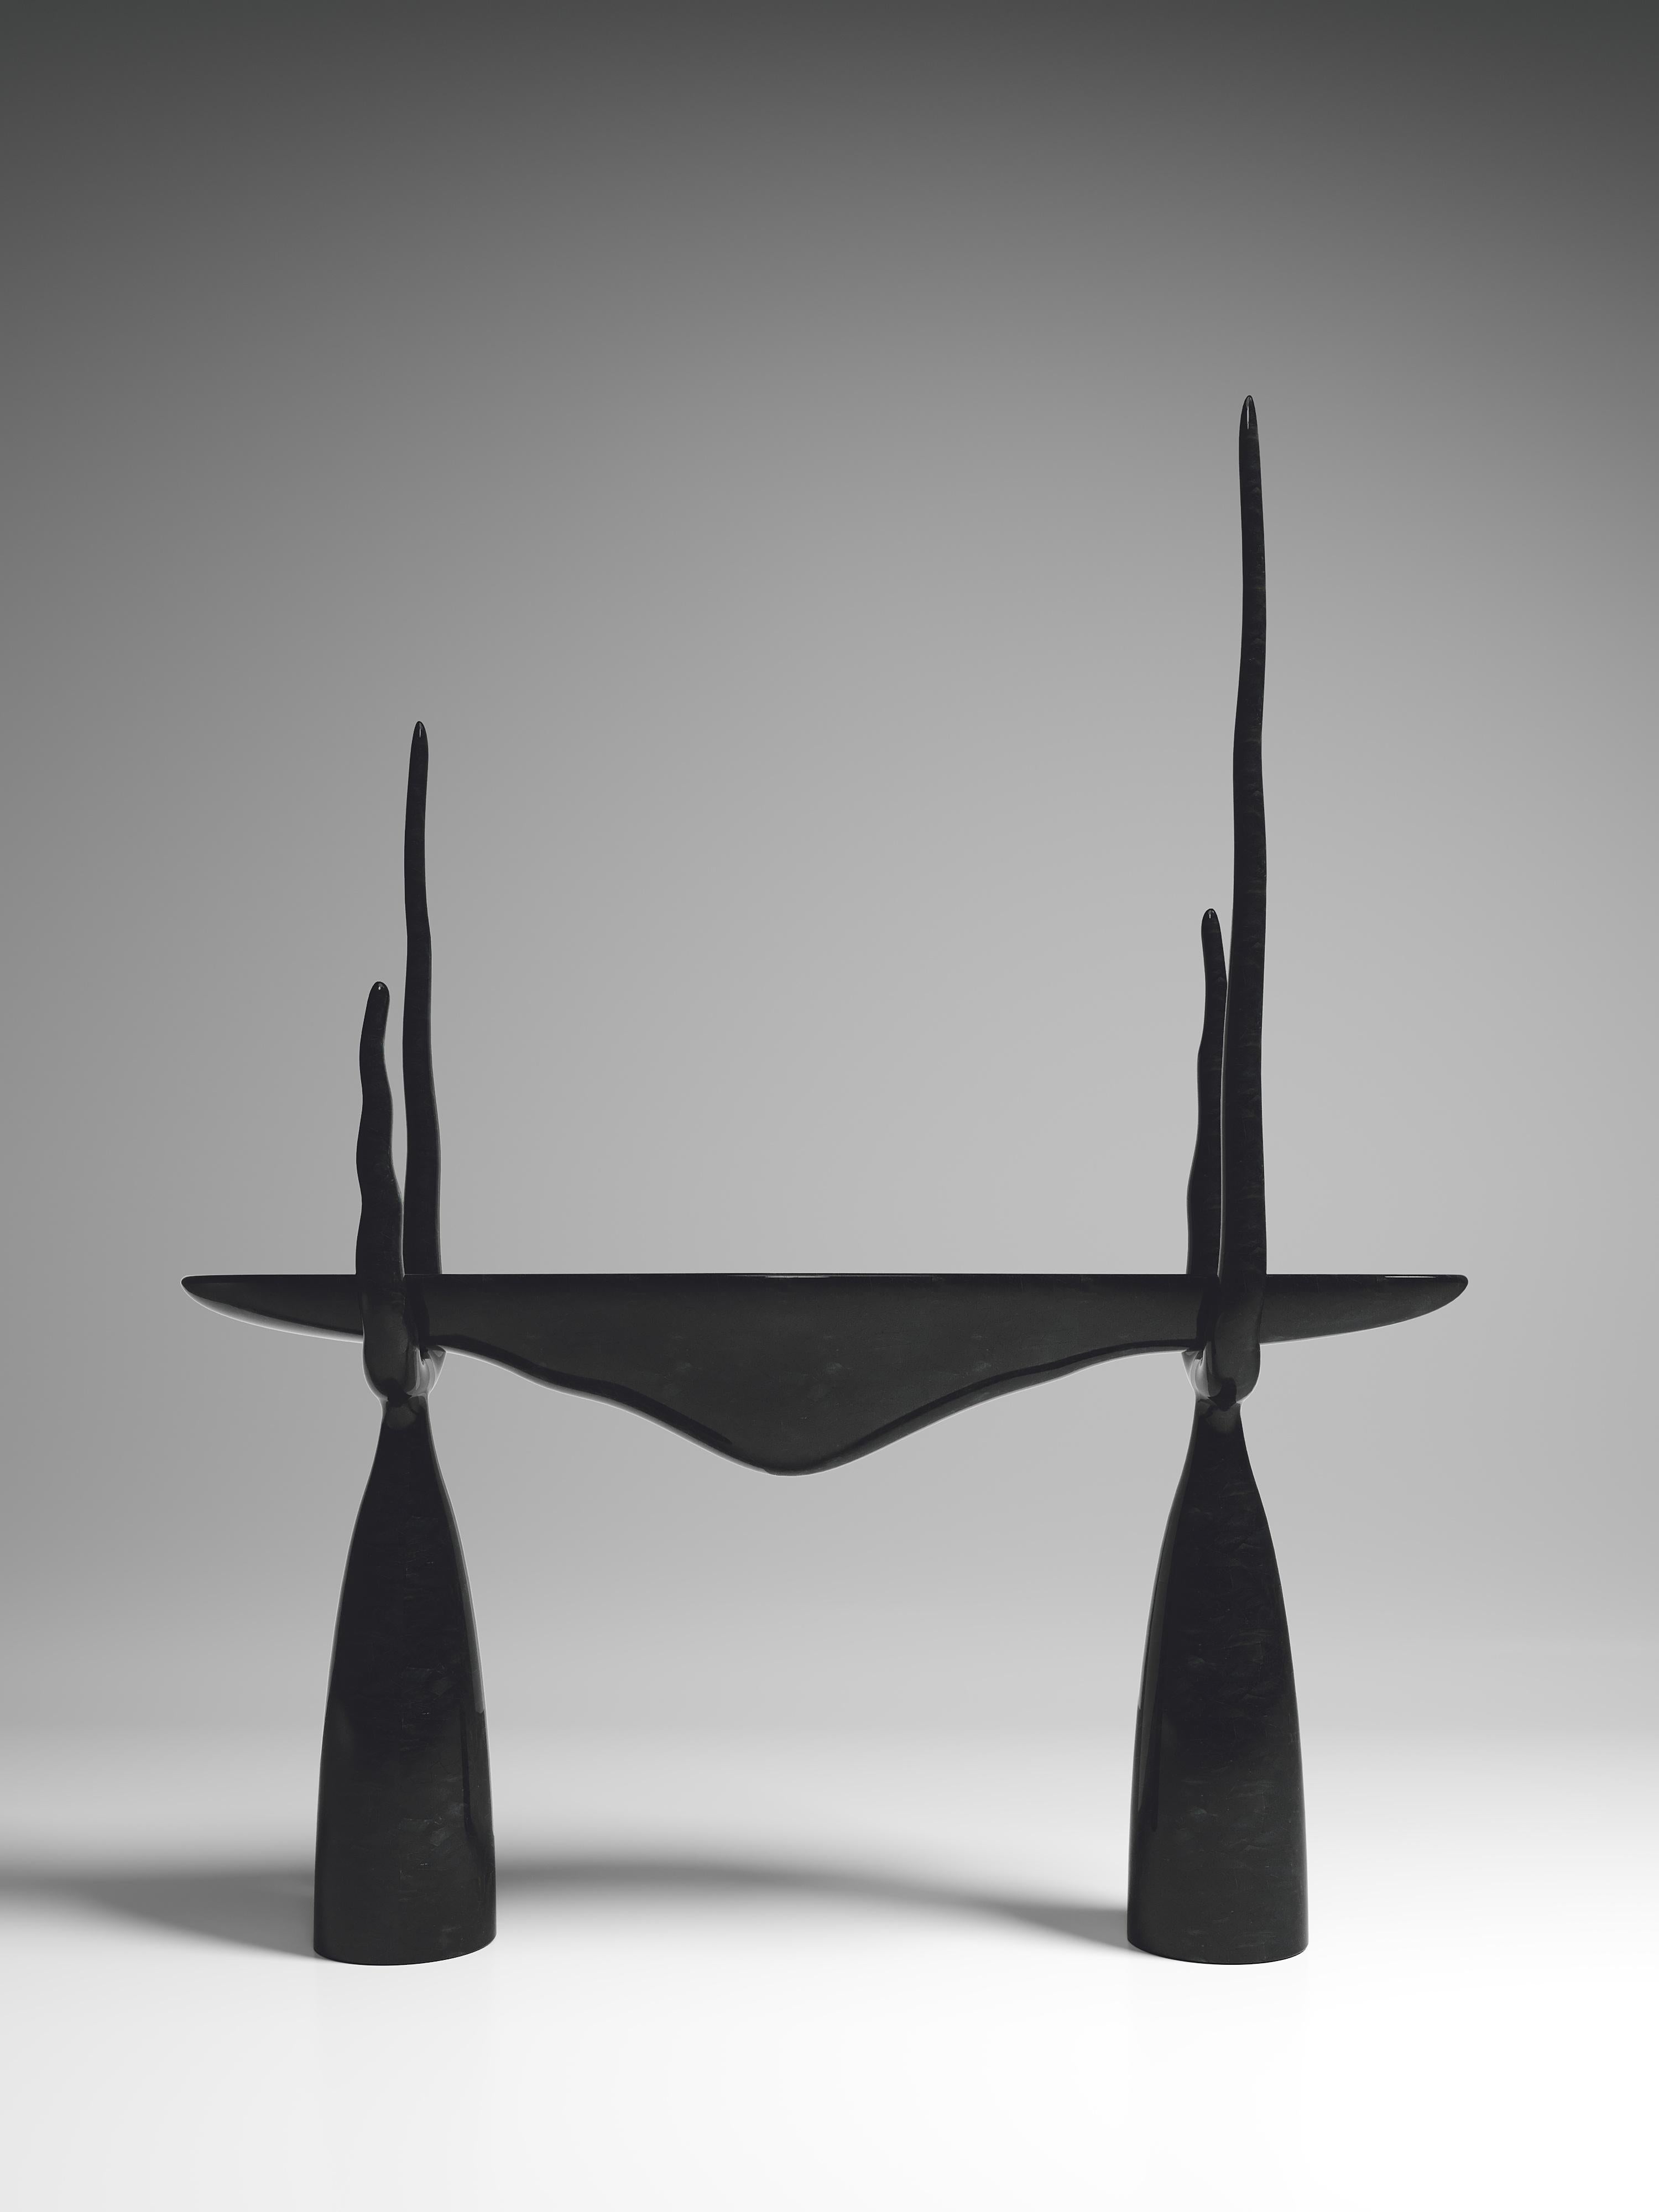 This listing is for the Sylvie Console and Sylvie Chair by R&Y Augousti in Black Pen Shell

The Sylvie Console is an ethereal and sculptural piece. This table is inspired by the iconic Sylvie Chair by R&Y Augousti; one of their very first designs,